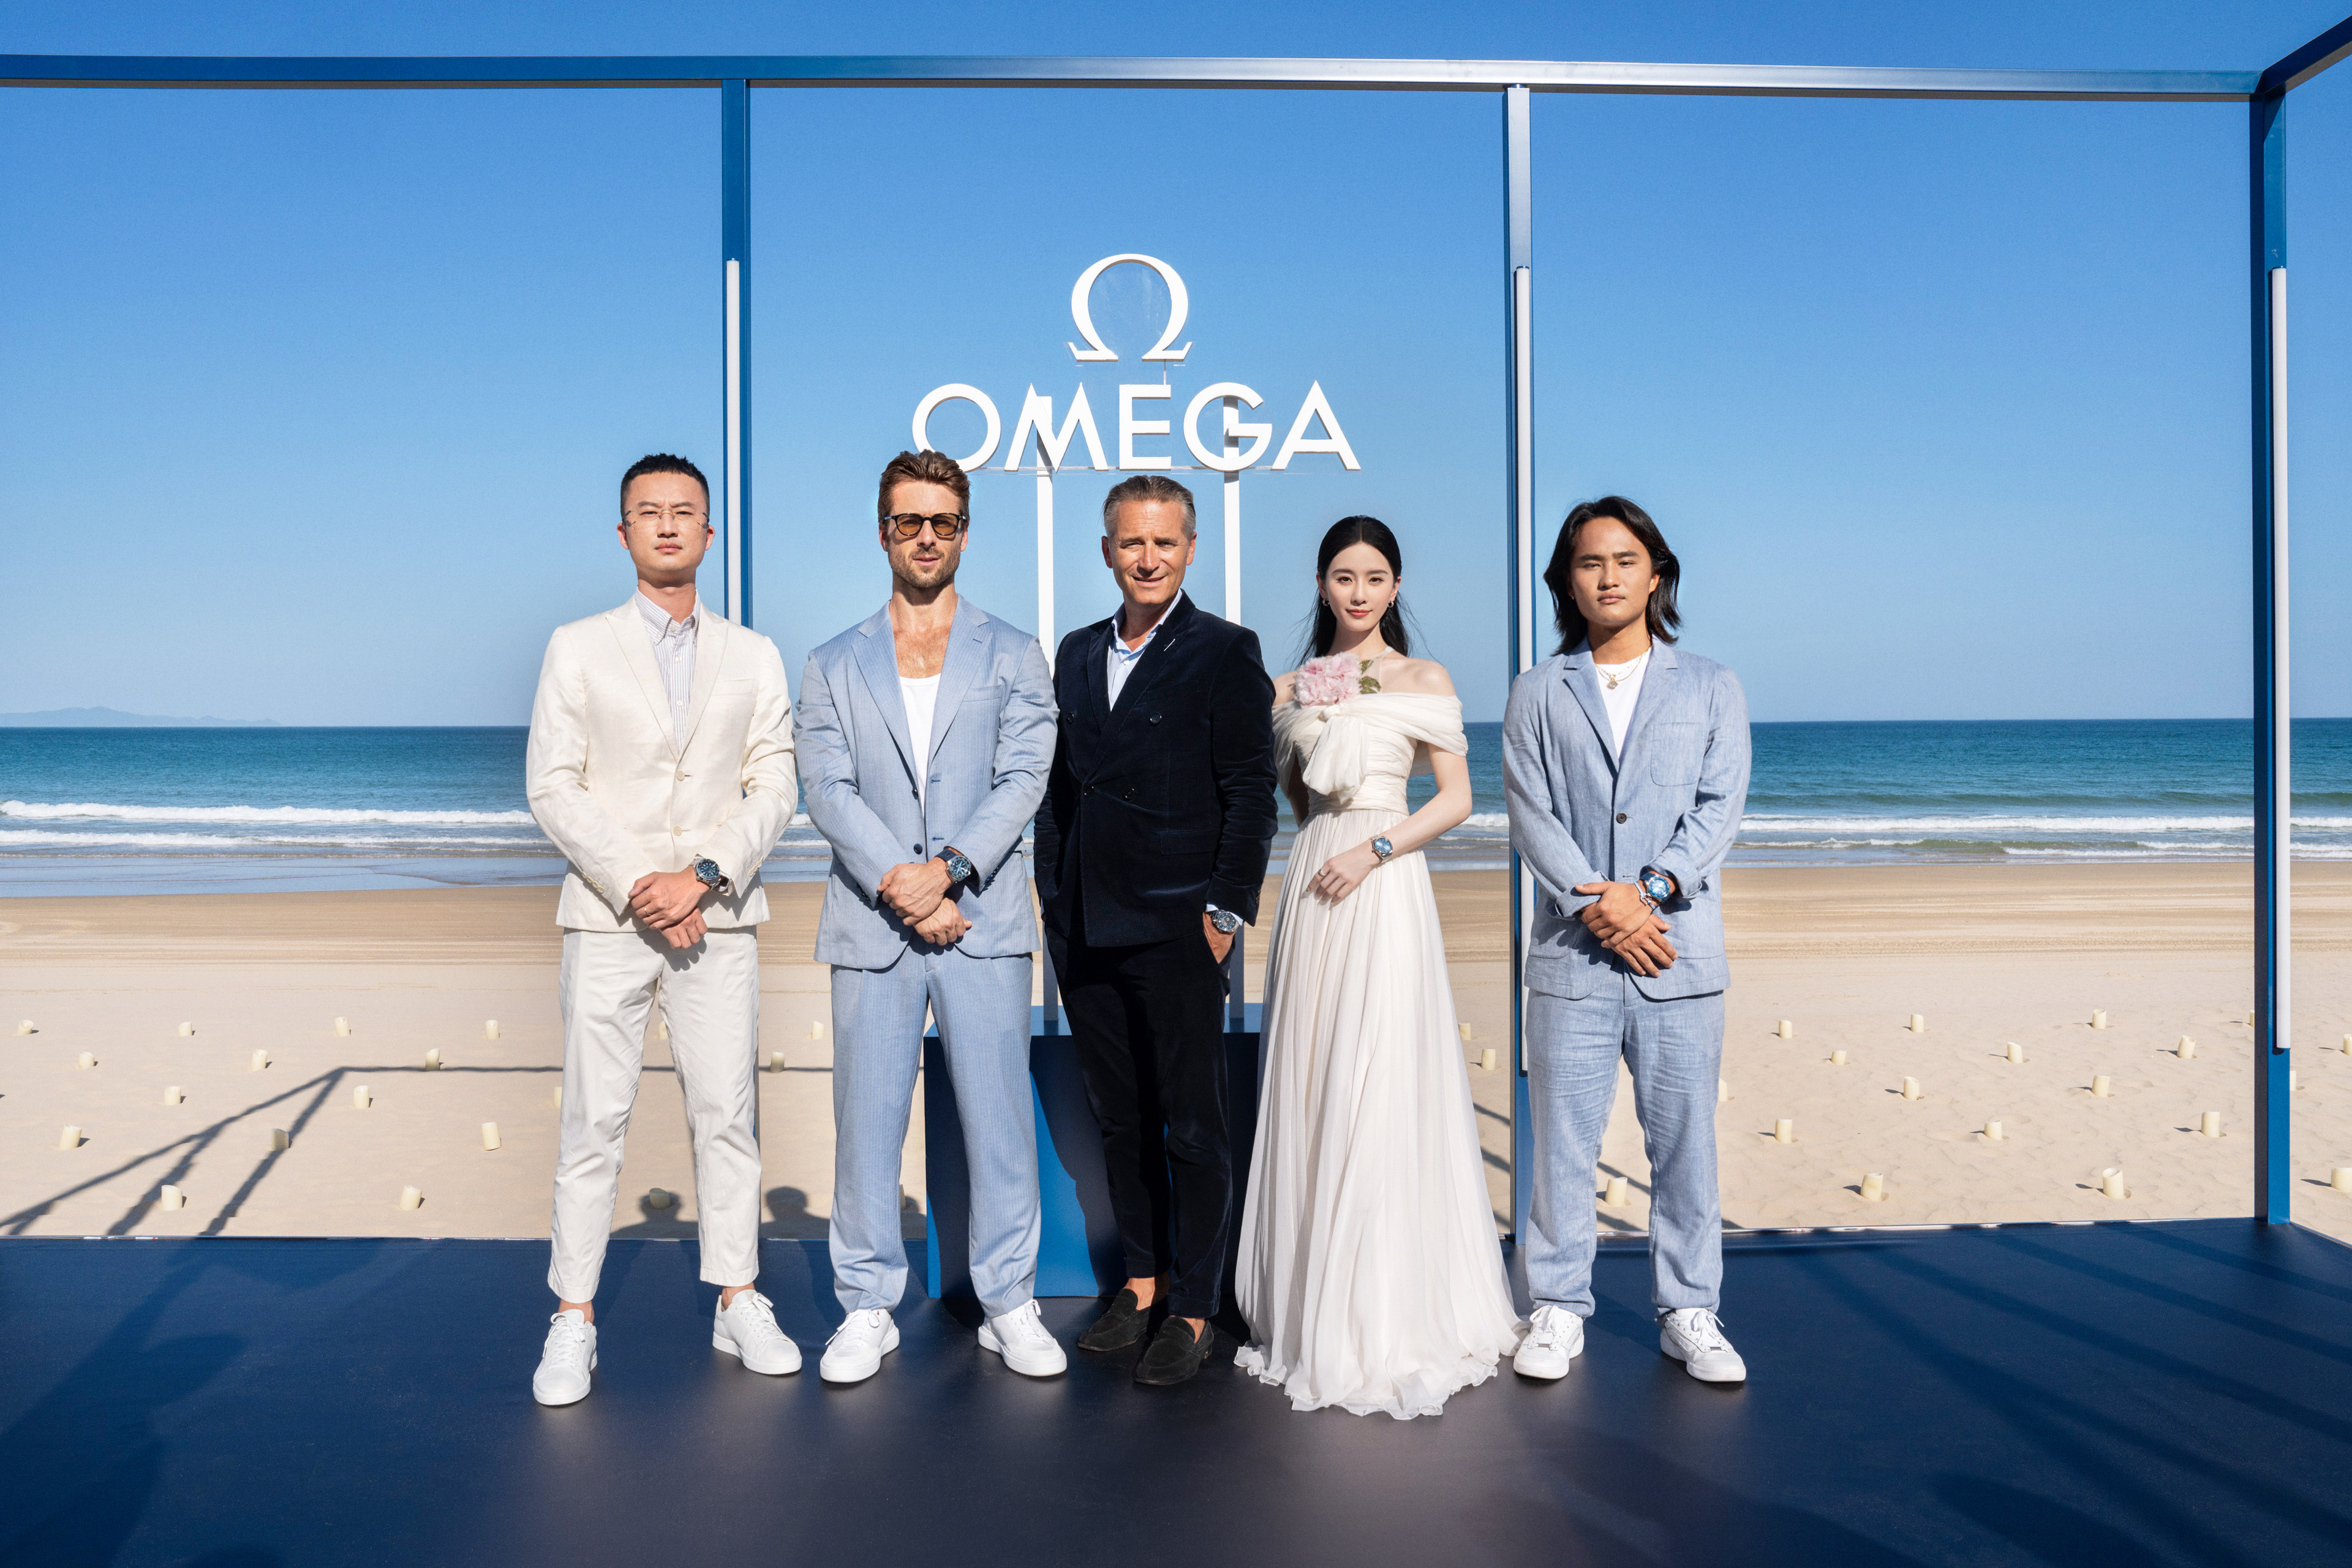 Celebrities (from left) Zhang Yi, Glen Powell, Omega CEO and president Raynald Aeschlimann, Liu Shishi and Qin Zhuo at the Omega Seamaster Summer Blue collection launch in Sanya, China. Photo: Omega